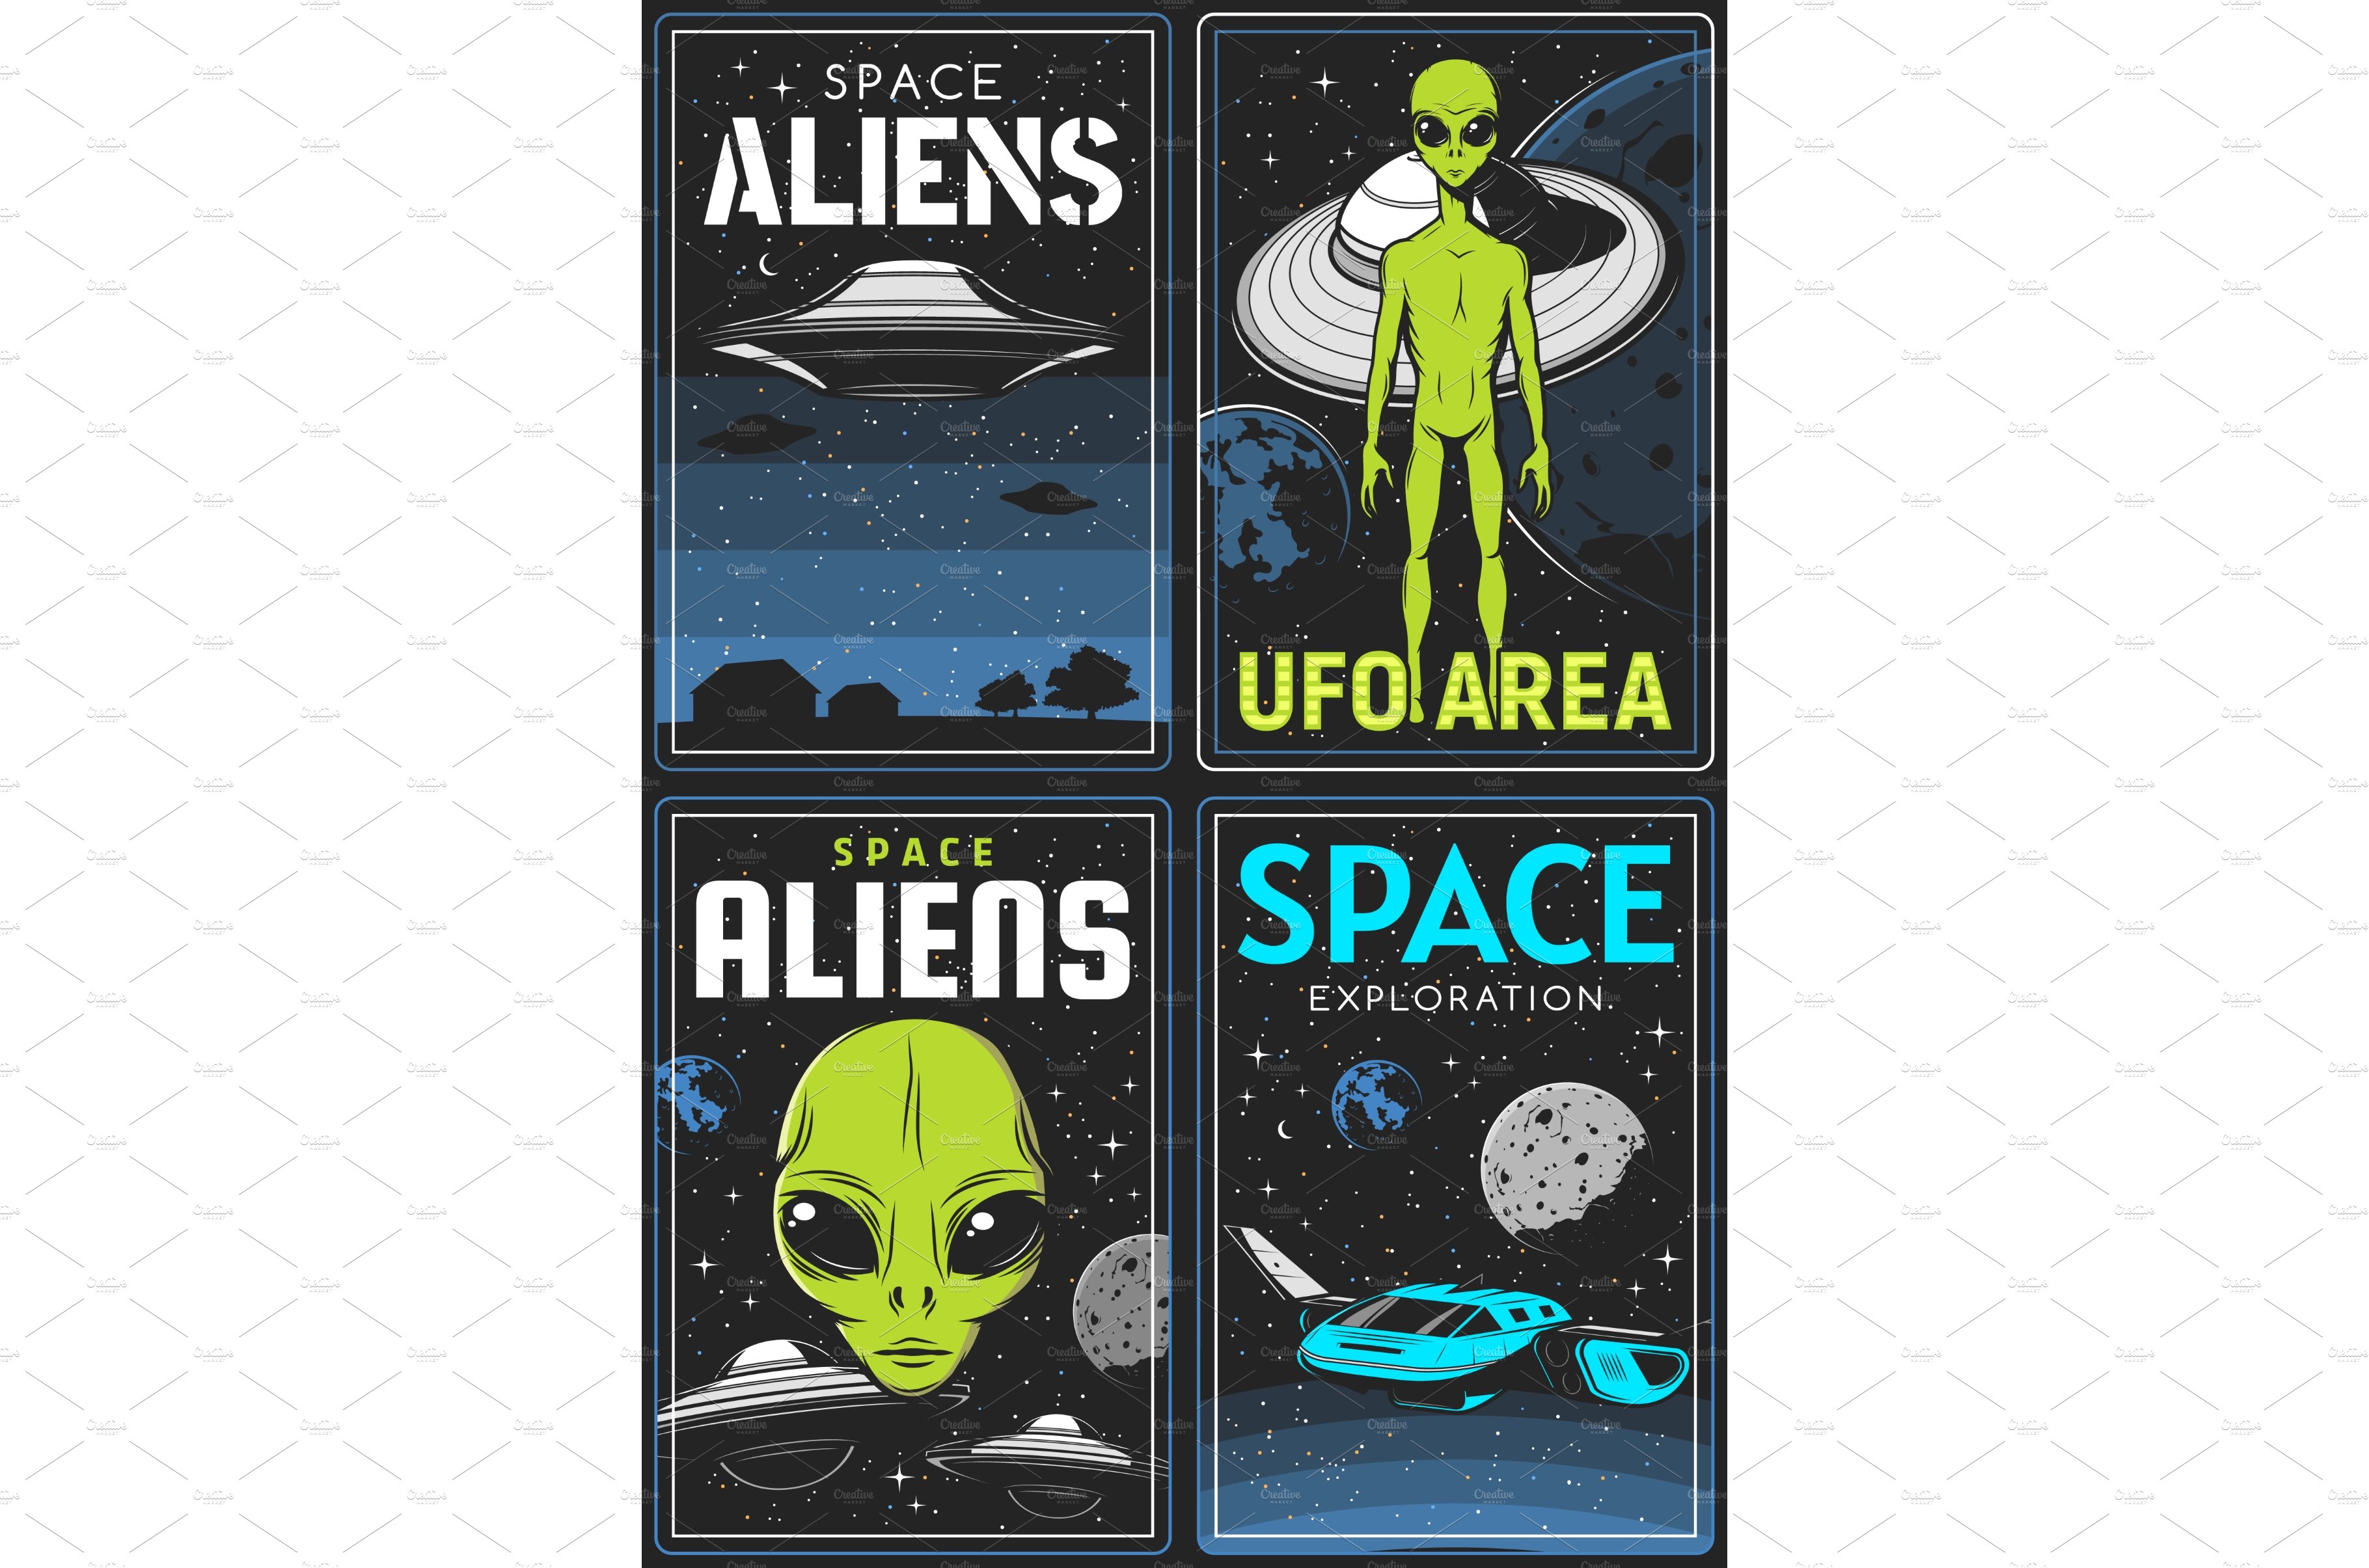 Retro posters with alien and ufo cover image.